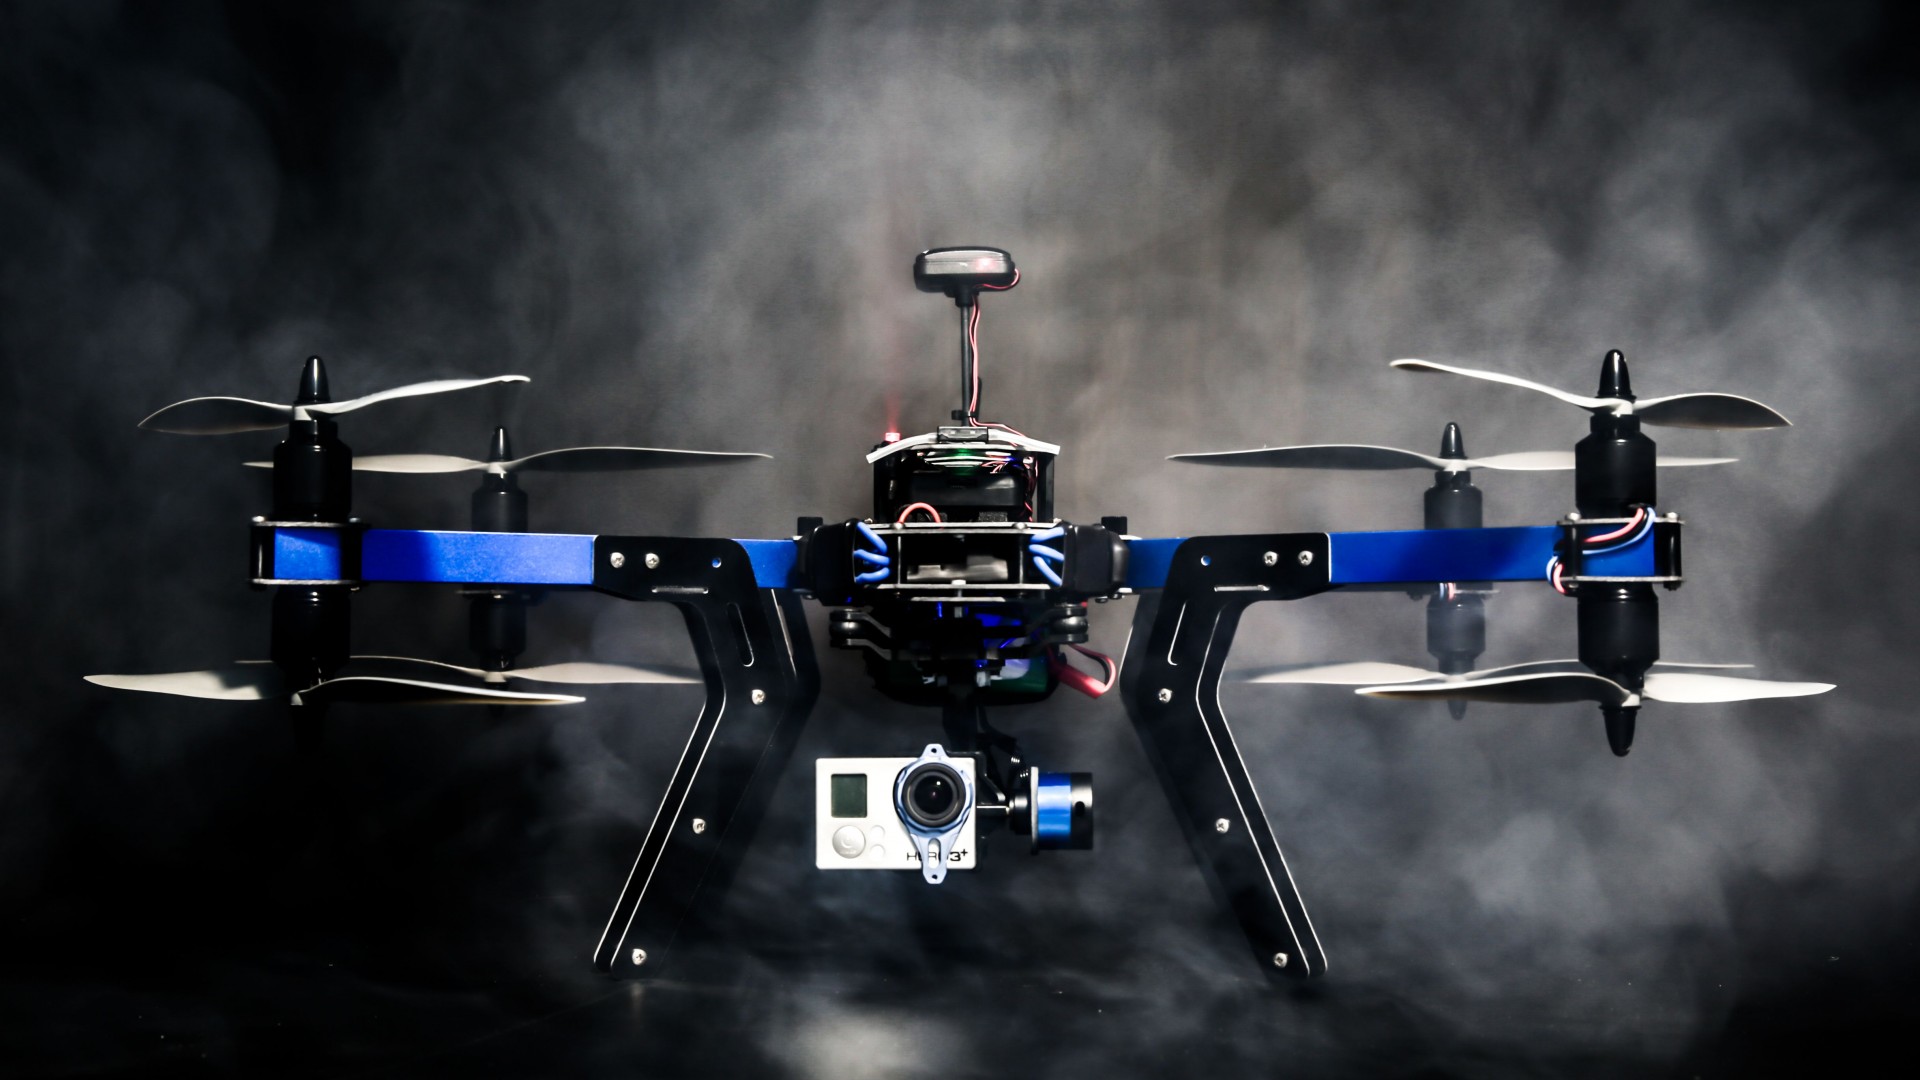 Quadcopter Wallpaper On